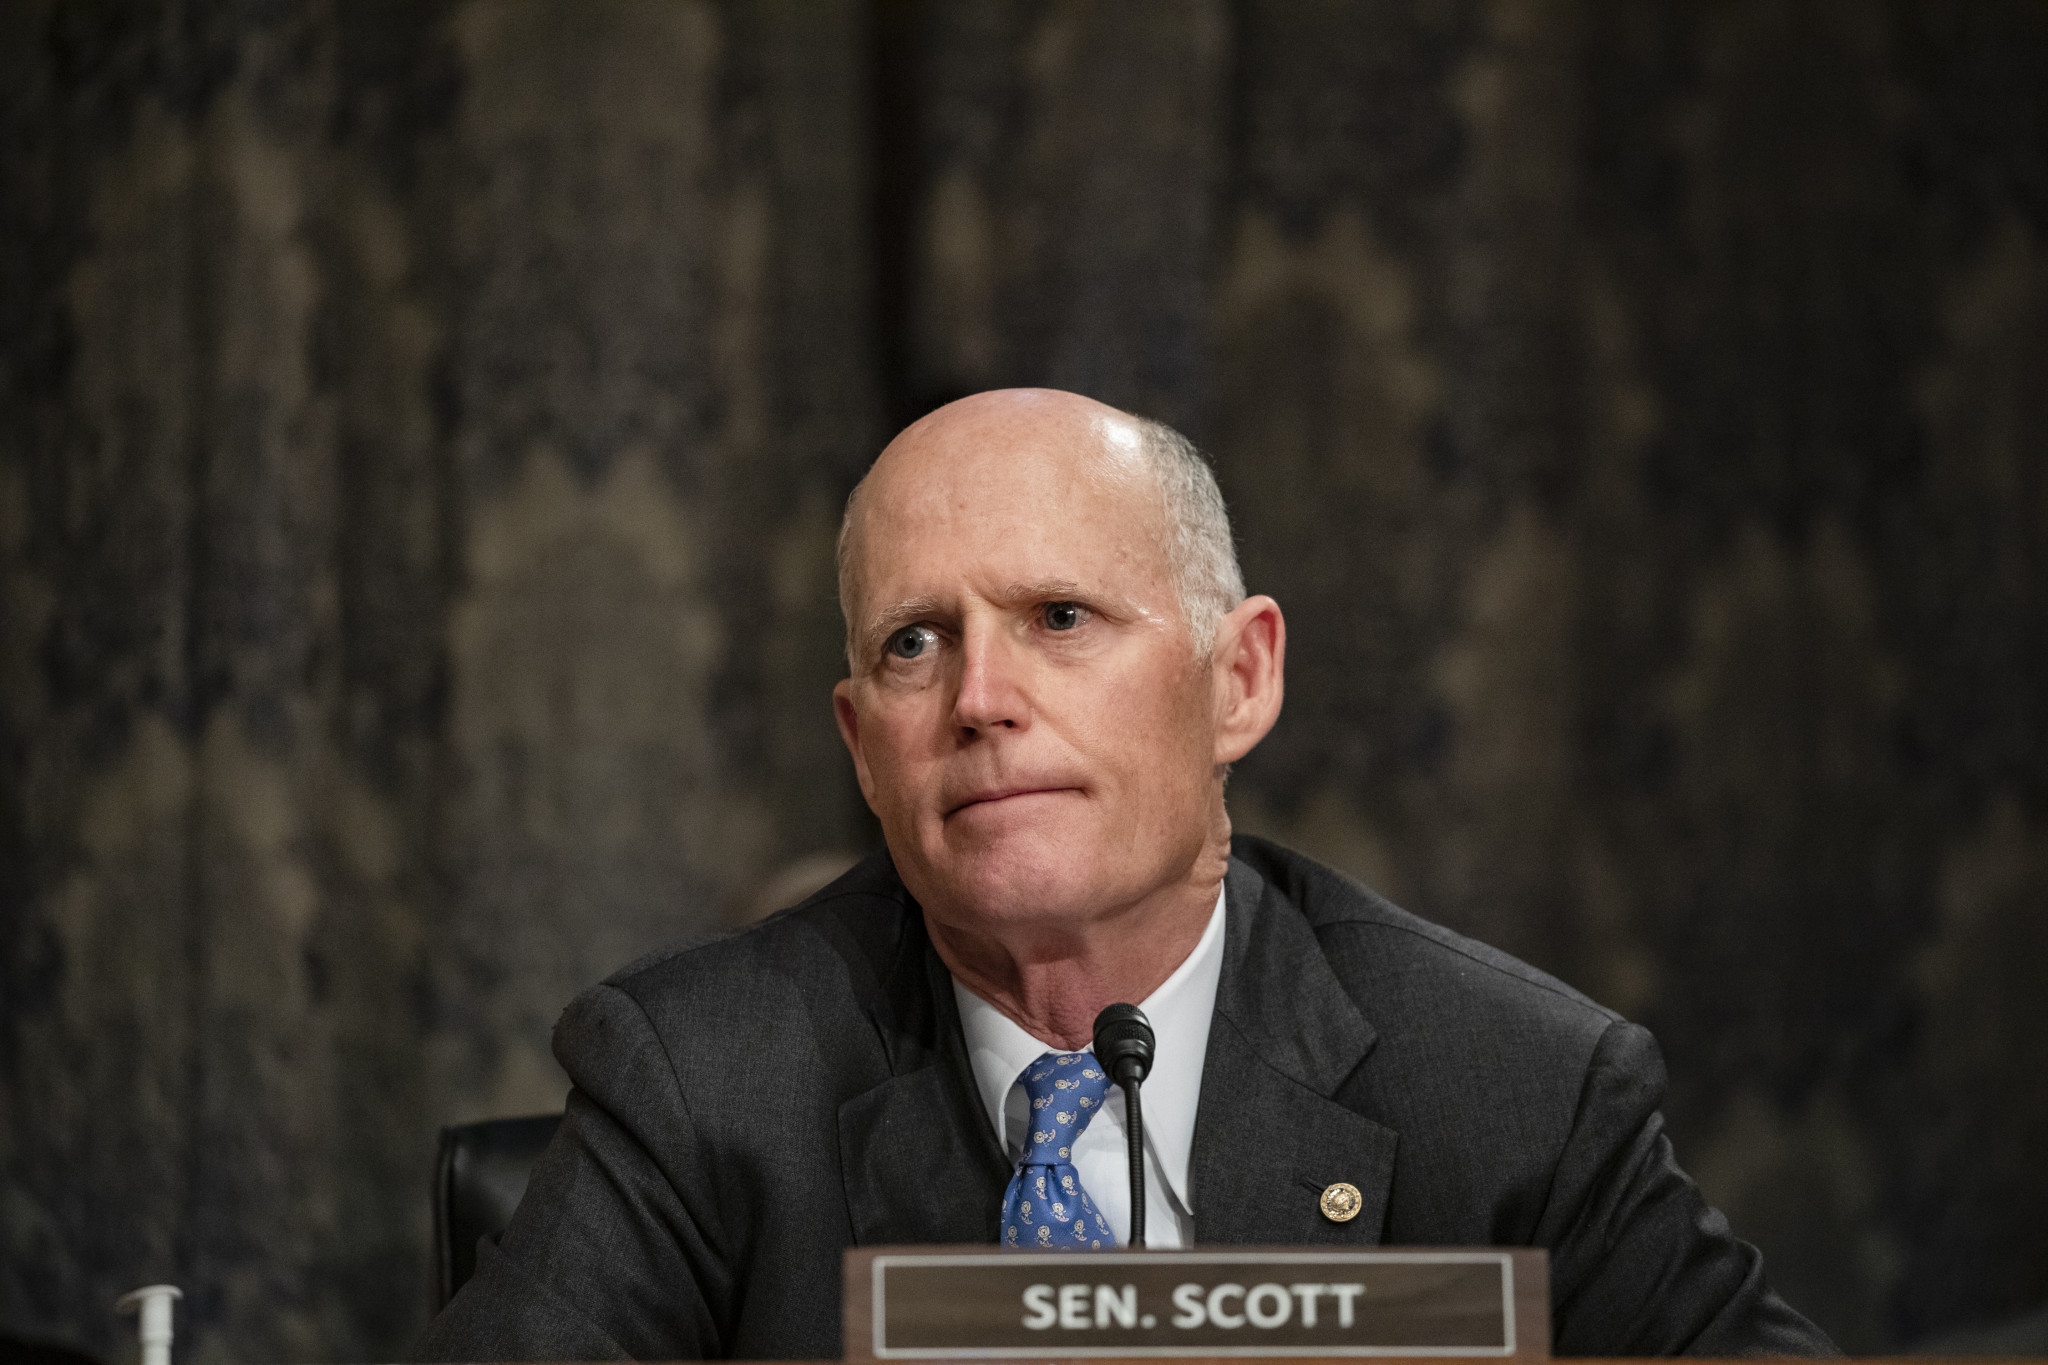 Senator Rick Scott has already called on the International Olympic Committee to consider moving the 2022 Winter Olympic Games away from China because of human rights concerns ©Getty Images